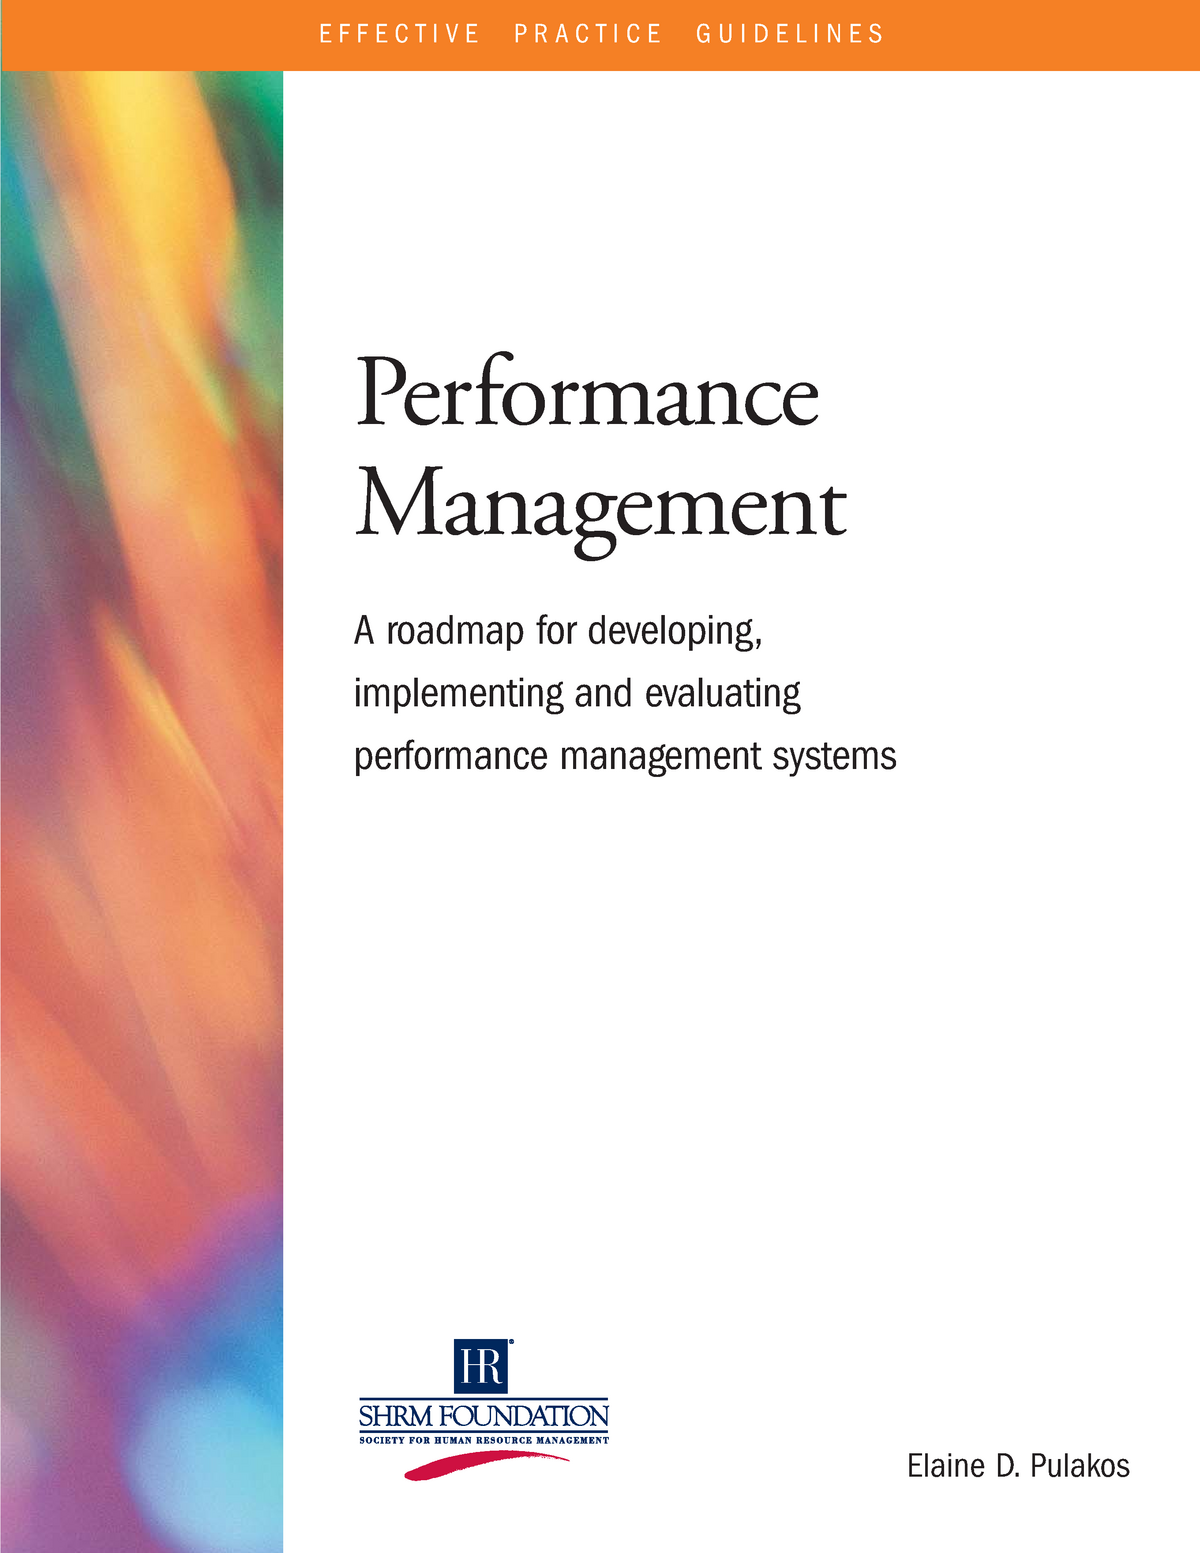 dissertations in performance management